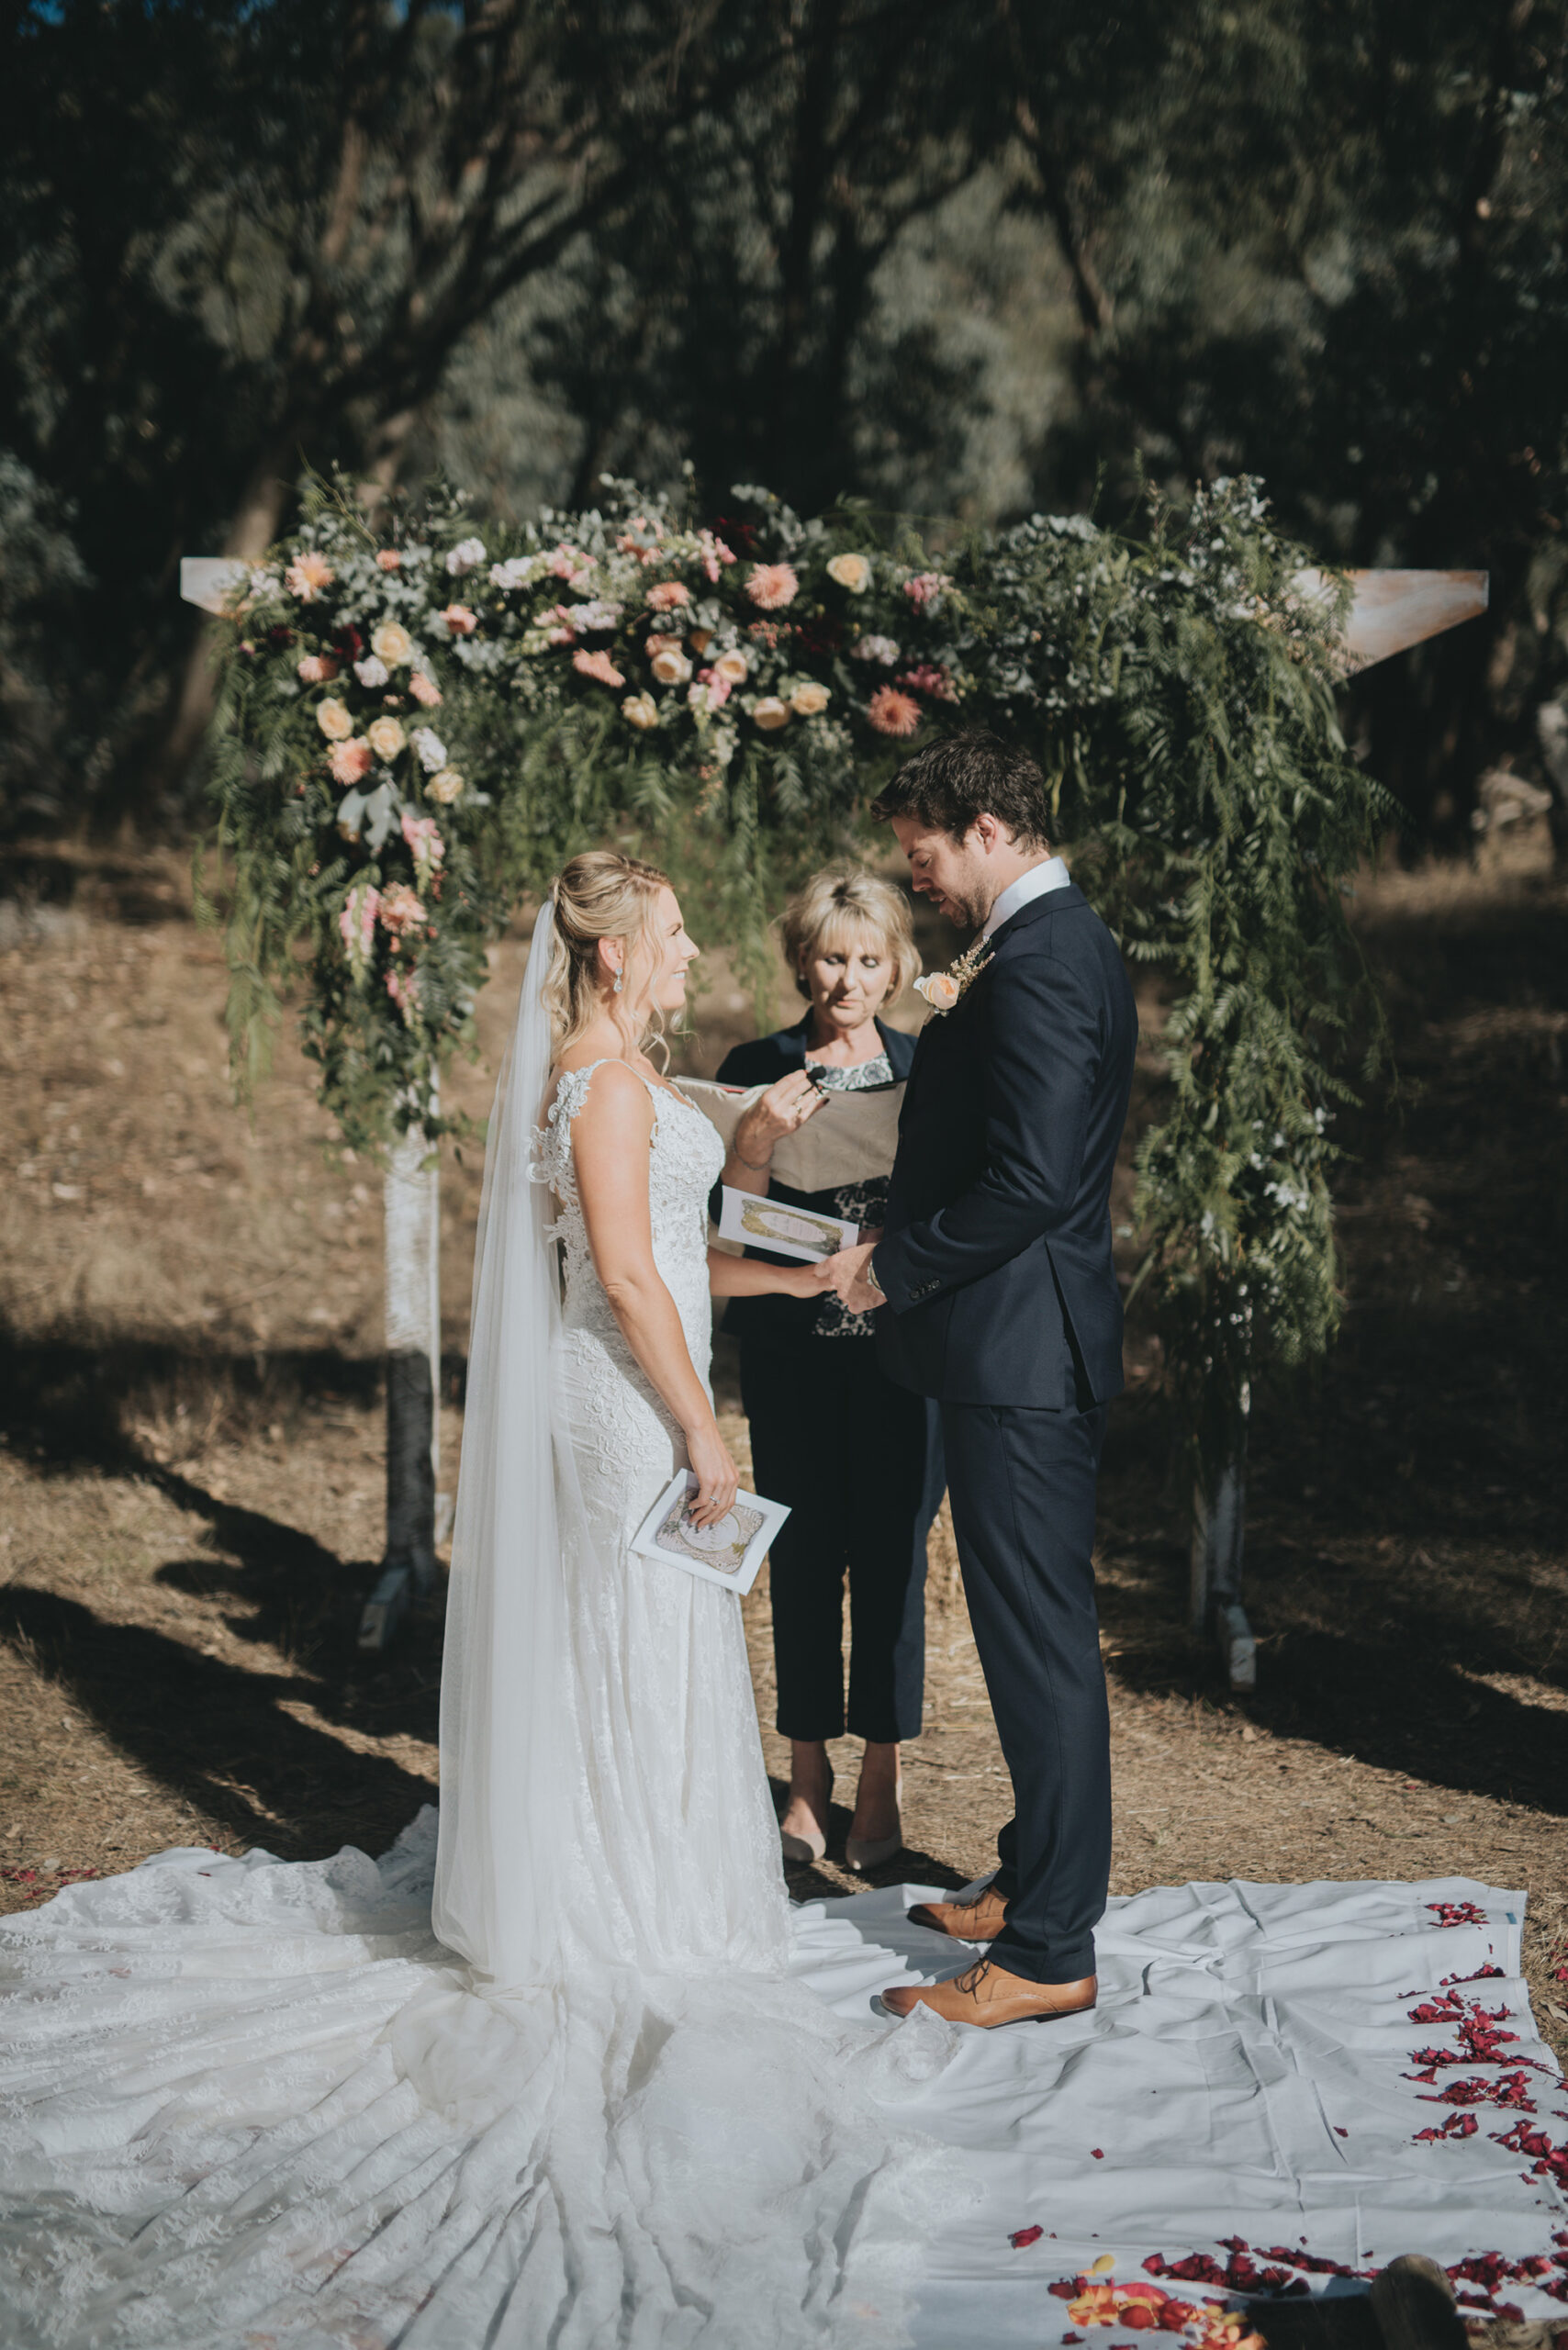 Kate_Tristan_Country-Rustic-Wedding_007